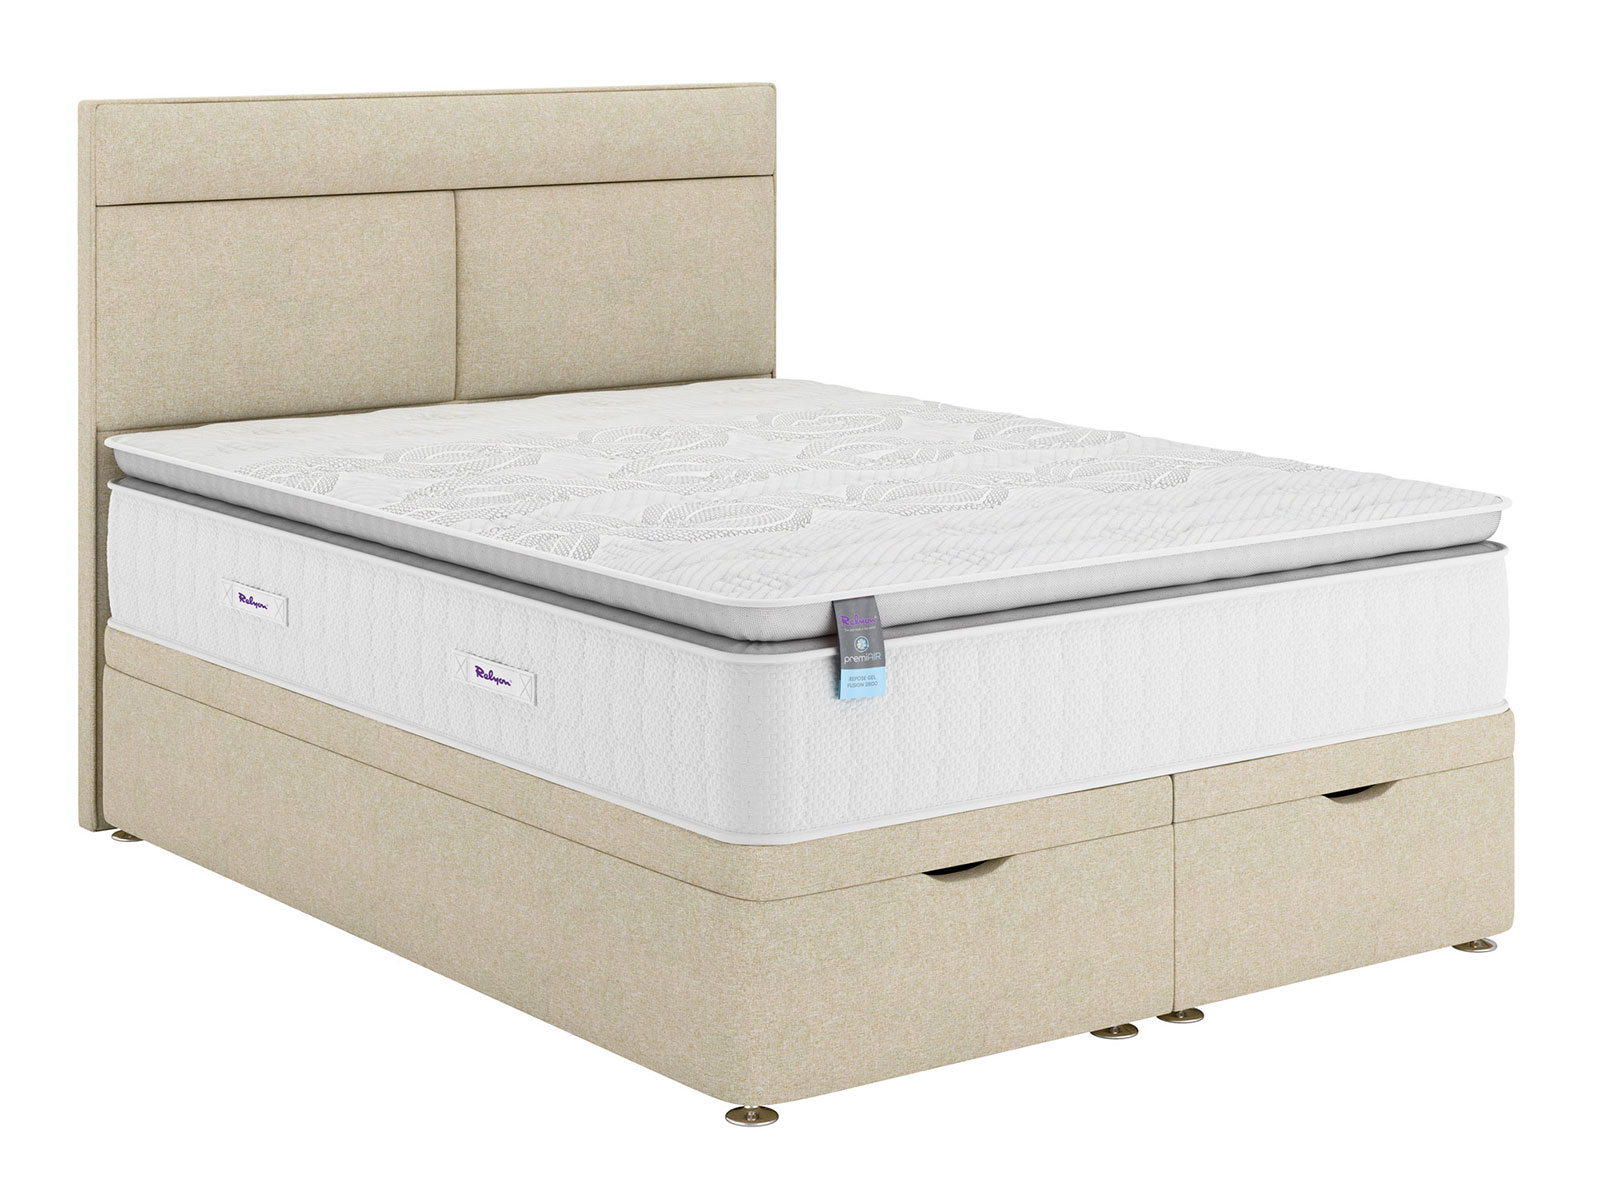 4ft Small Double Relyon Contemporary Gel Fusion 2800 Mattress